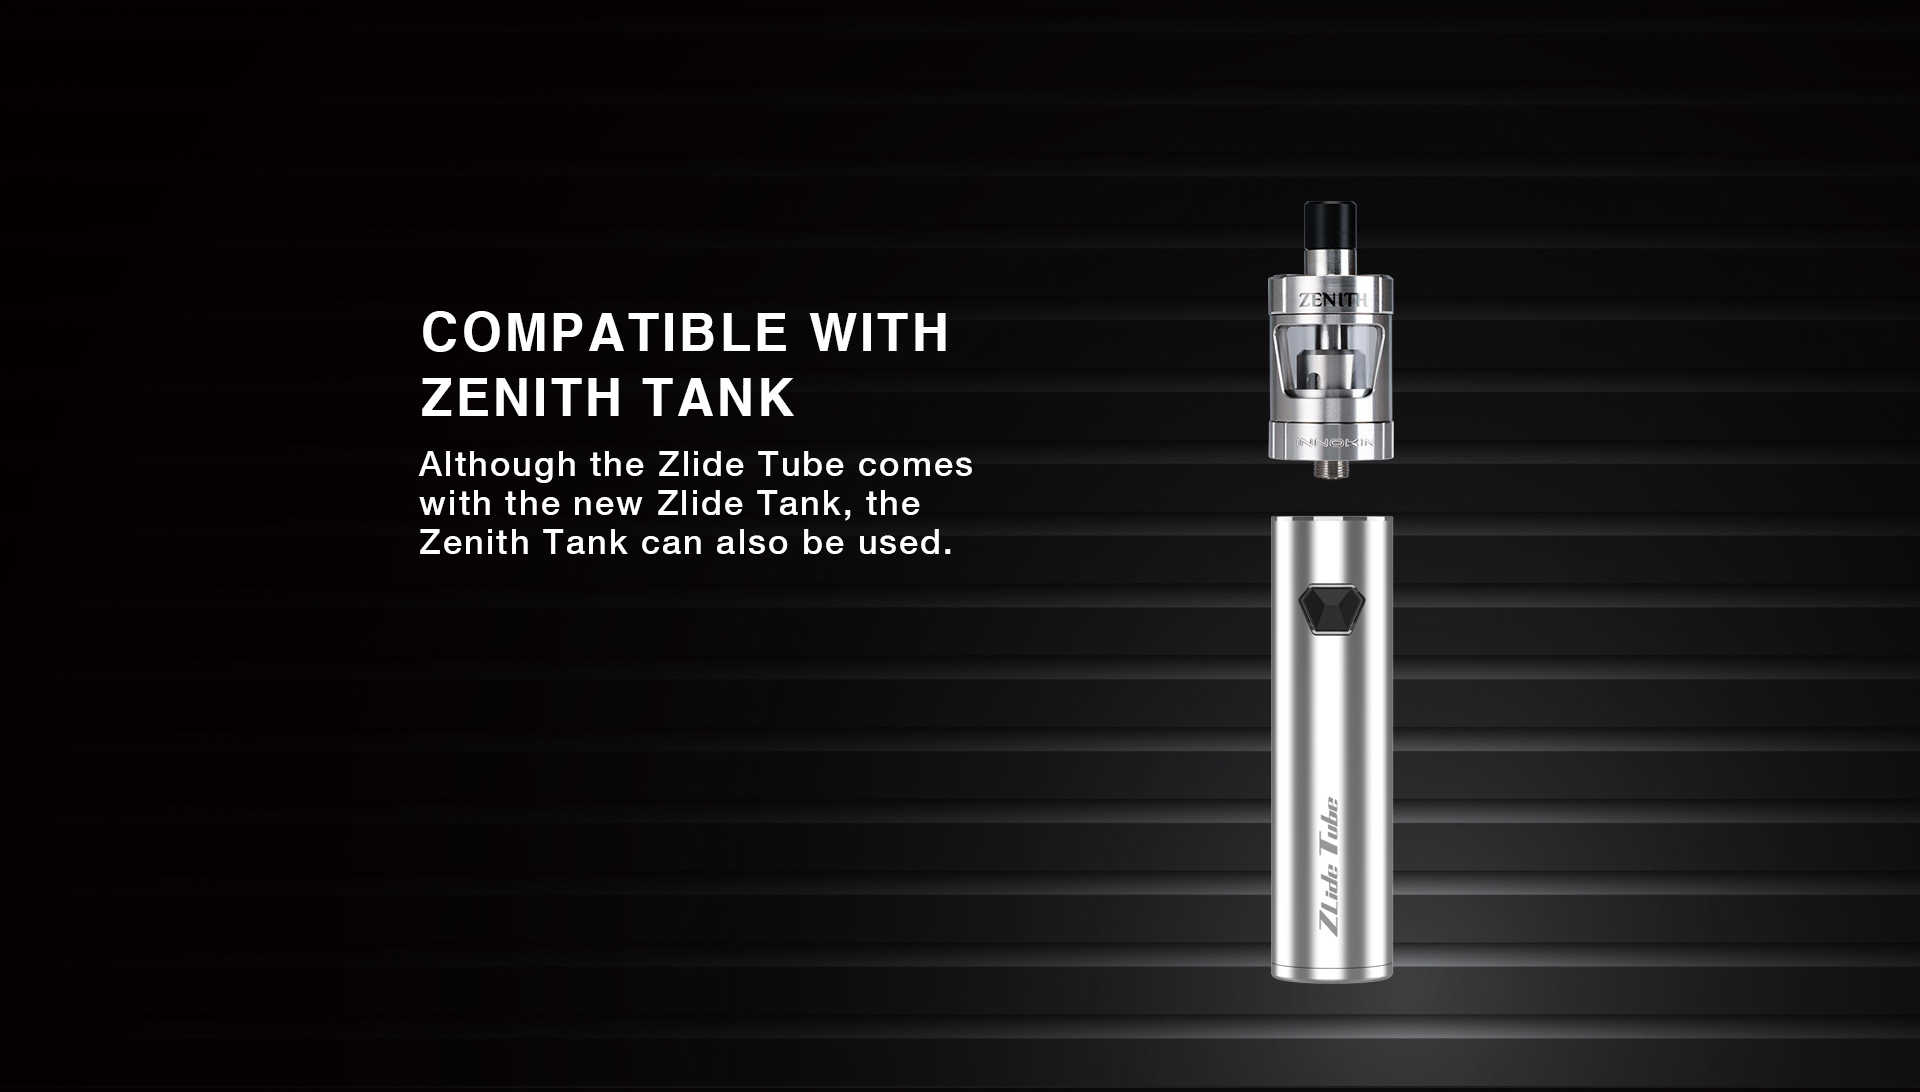 zlide tube compatible with zenith tank